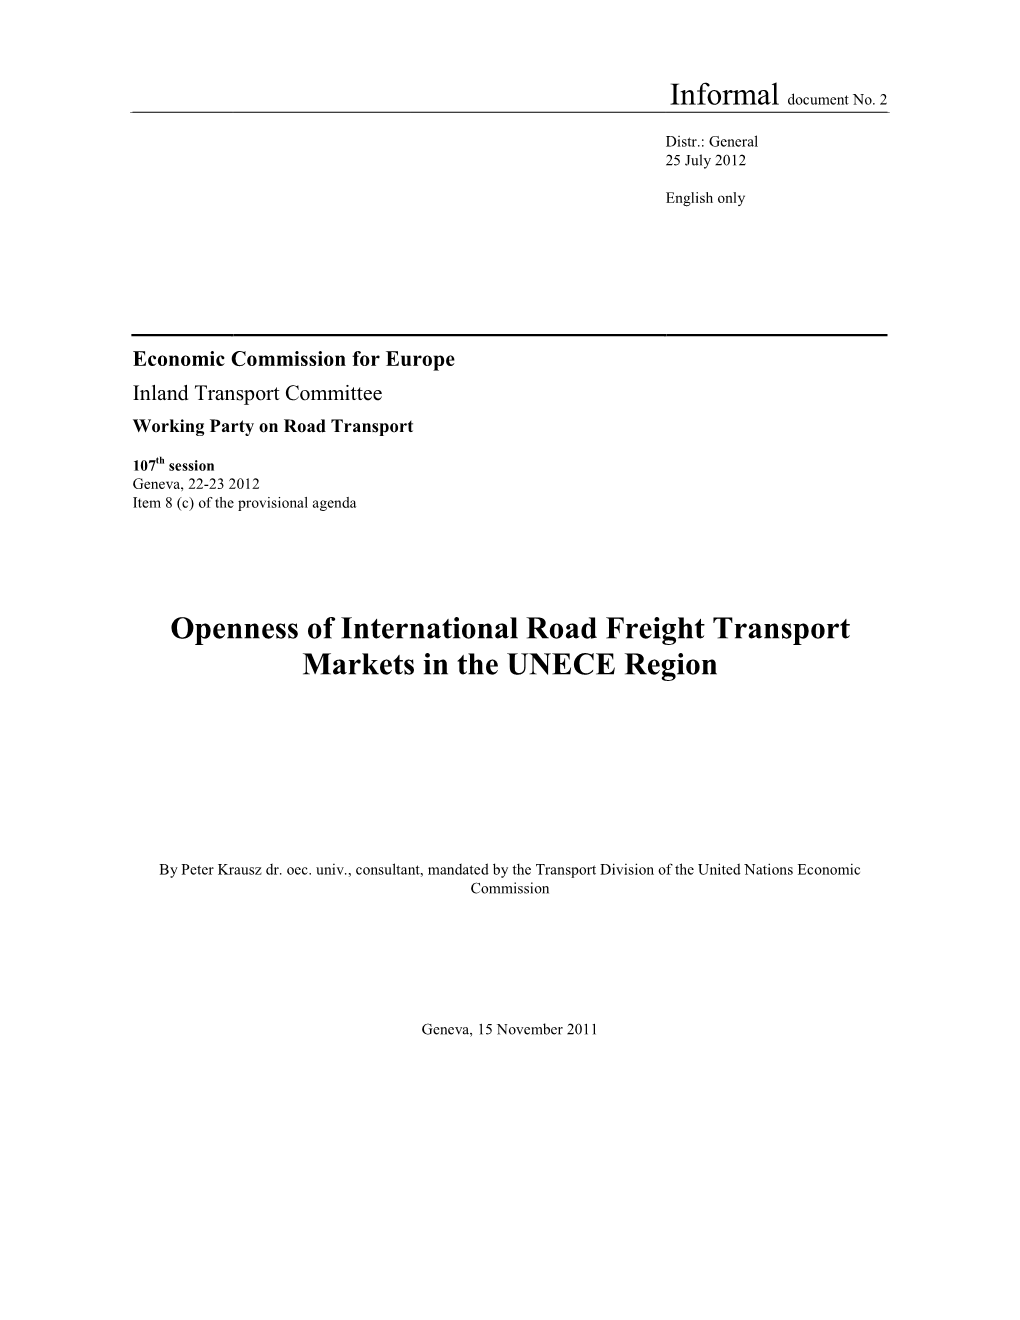 Openness of International Road Freight Transport Markets in the UNECE Region